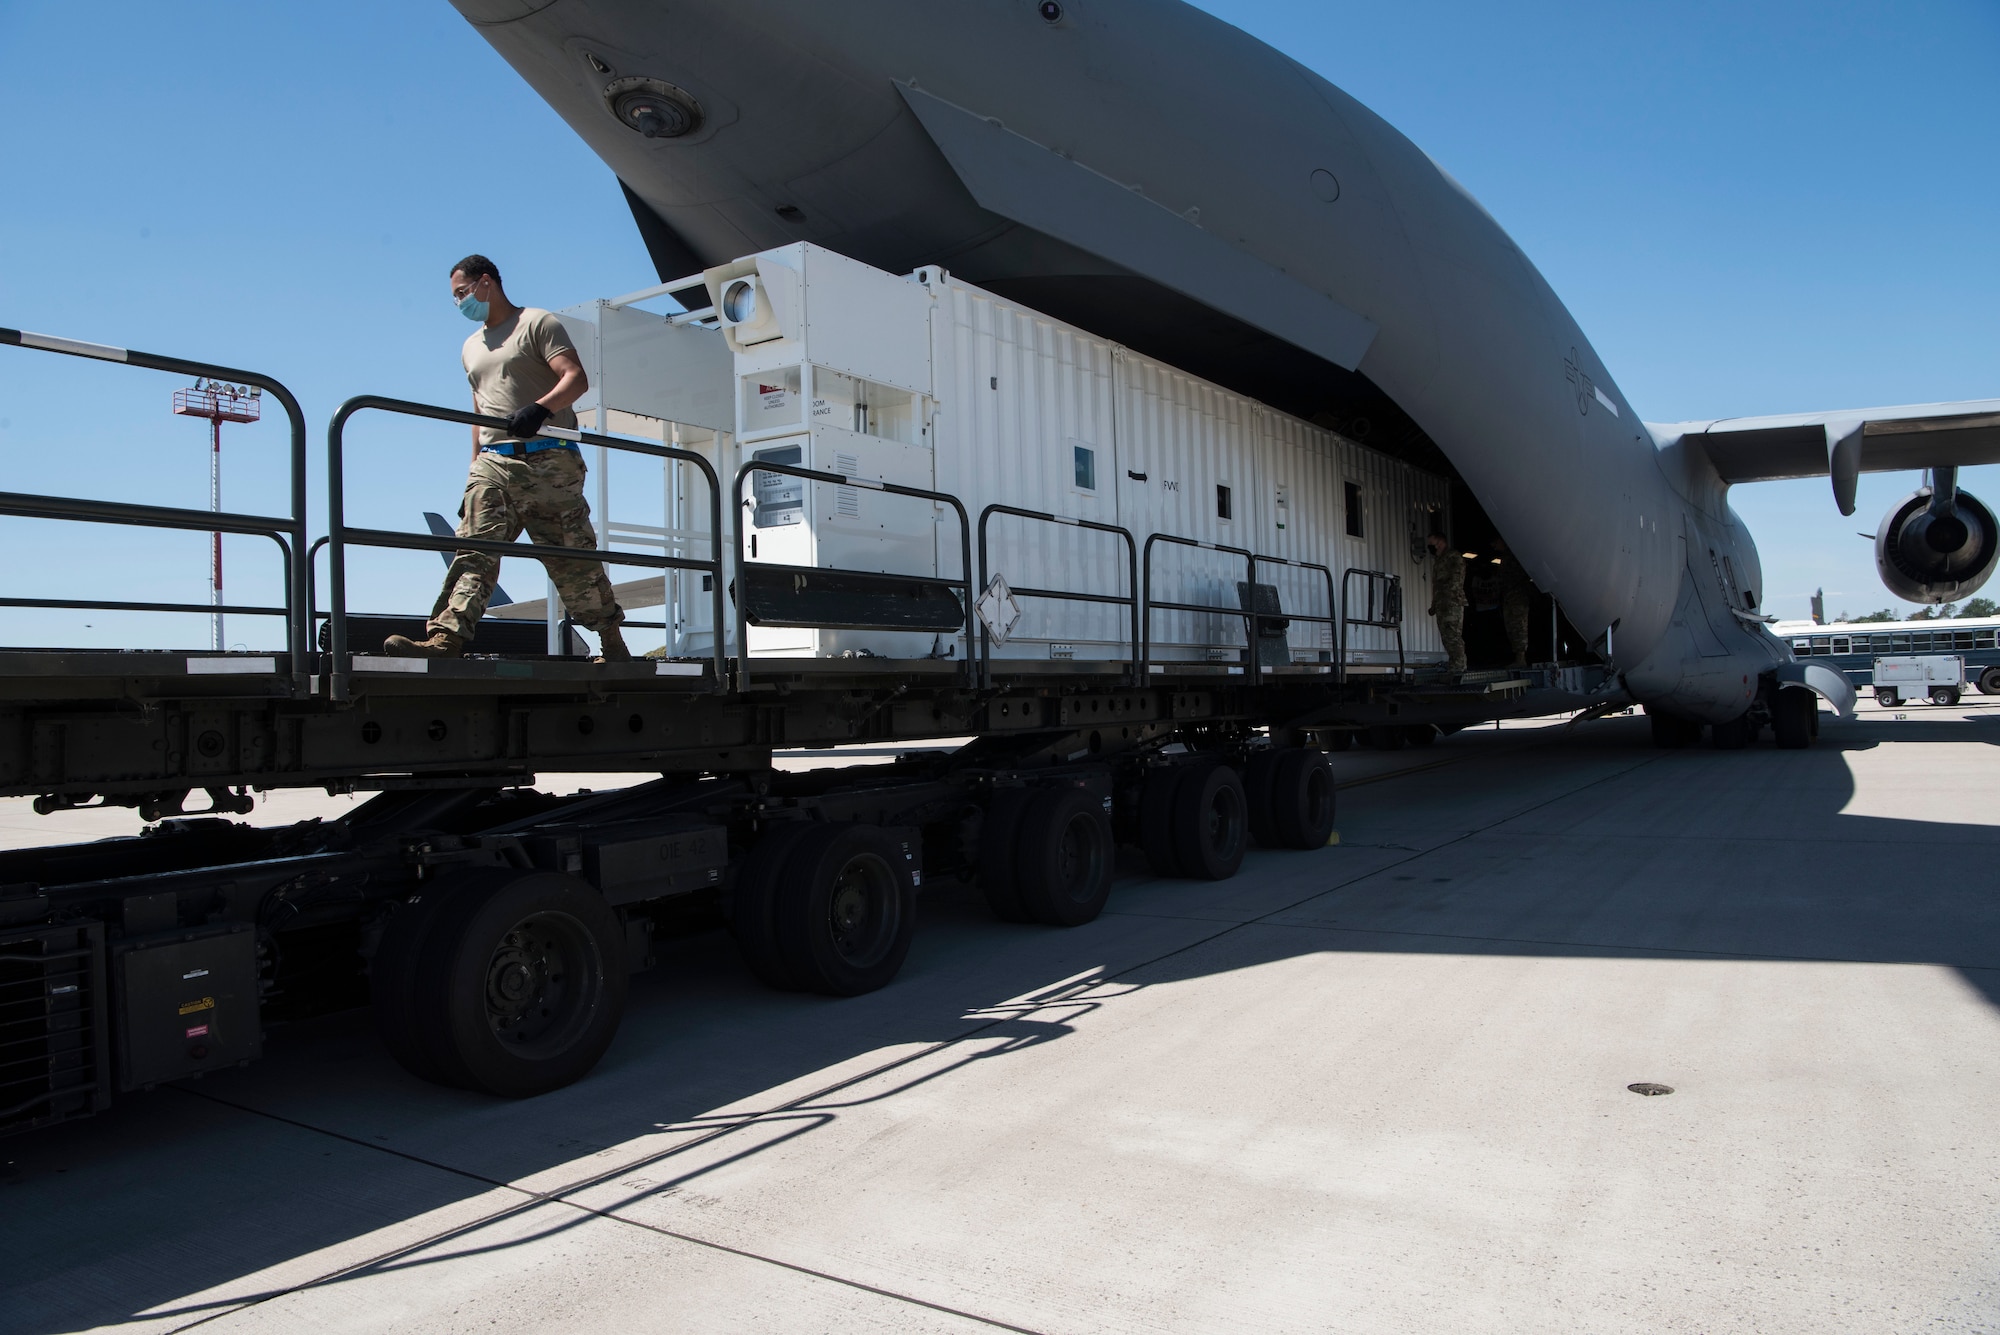 U.S. Air Force personnel assigned to the 721st Aerial Port Squadron off-load a Negatively Pressured Conex from a C-17 Globemaster III aircraft